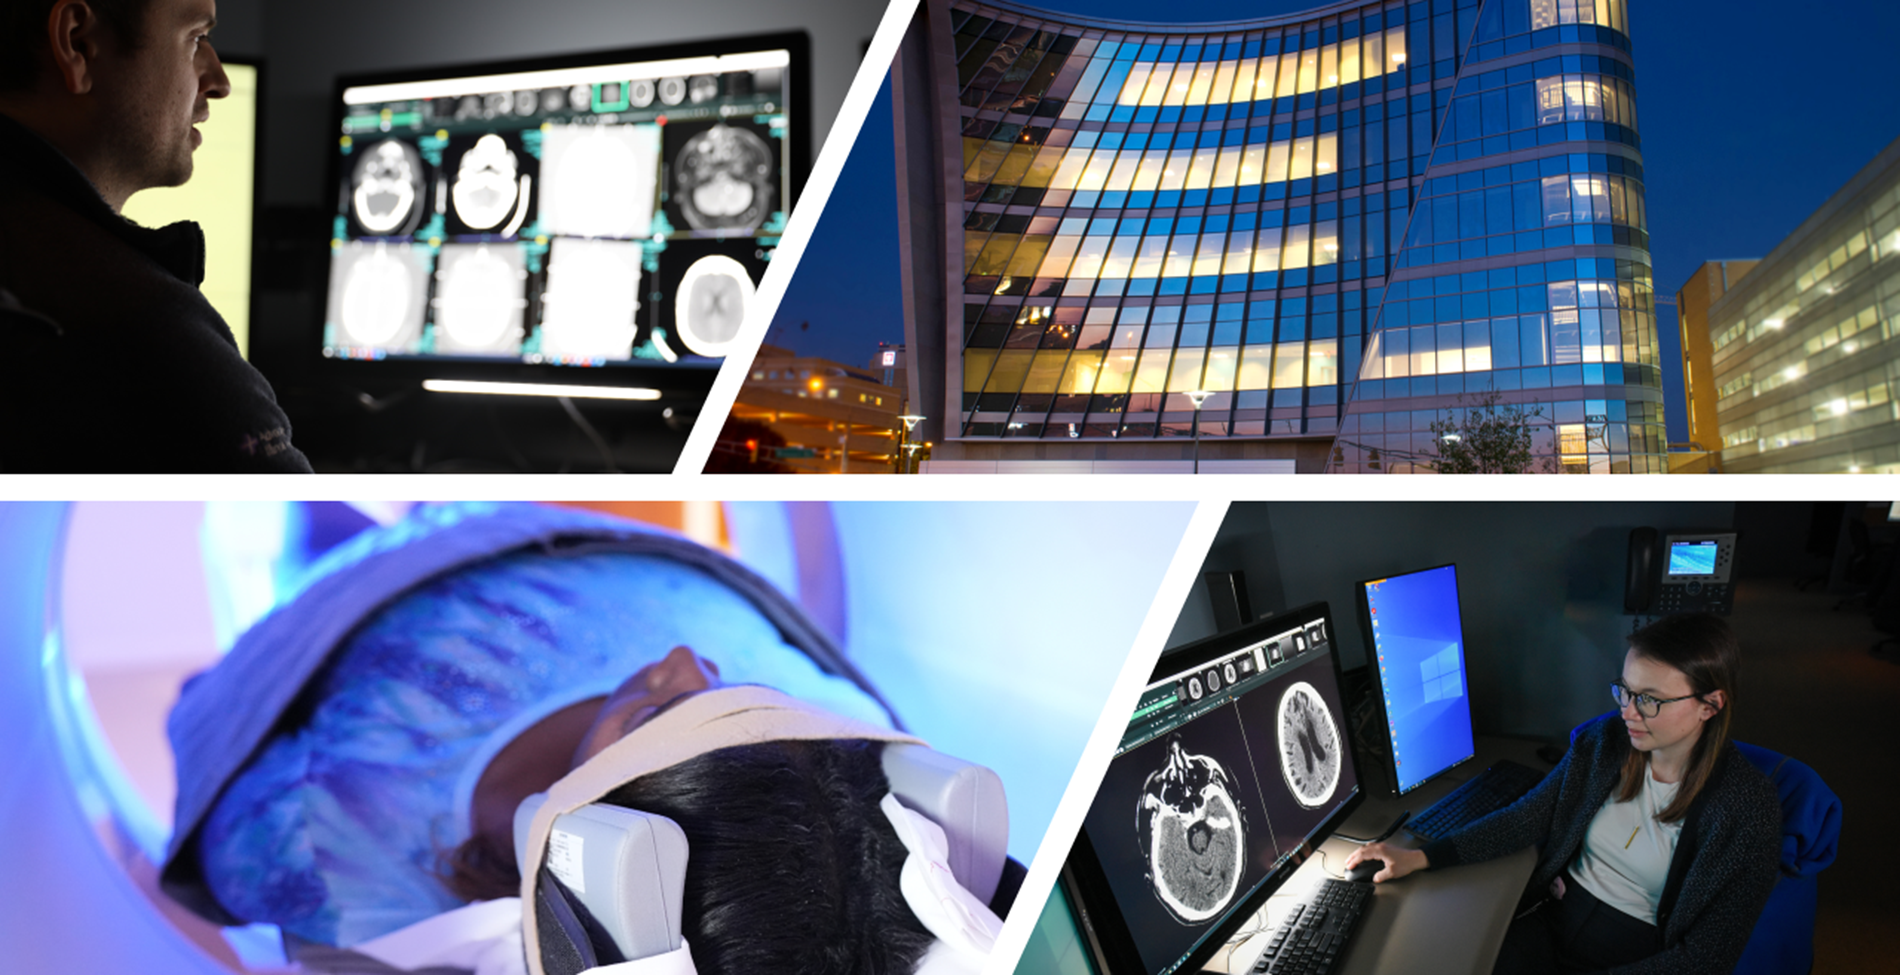 a collage of photos show imaging scans, the exterior of the hospital, a patient in a ct machine, and a trainee reviewing scans